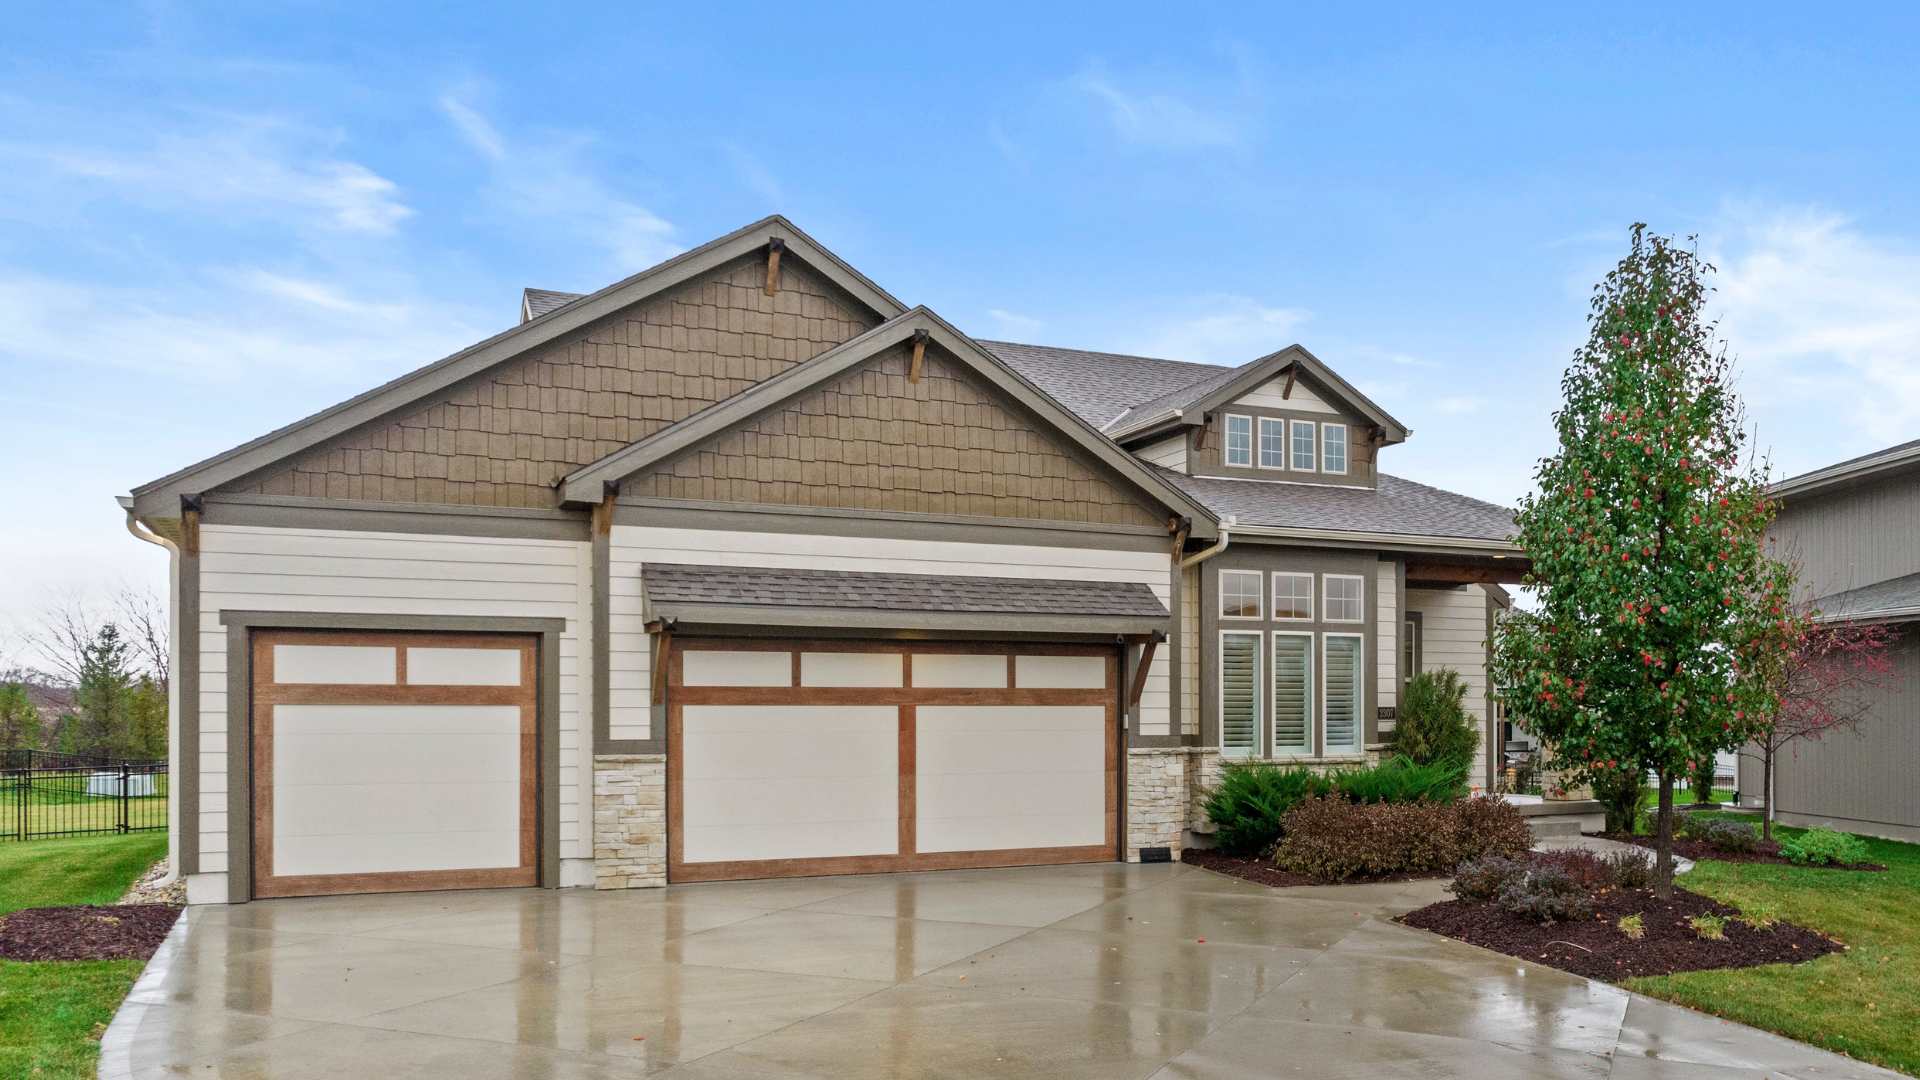 Front photo of a home with wet driveway from rain. Garage doors have light brown border and nice landscaping.